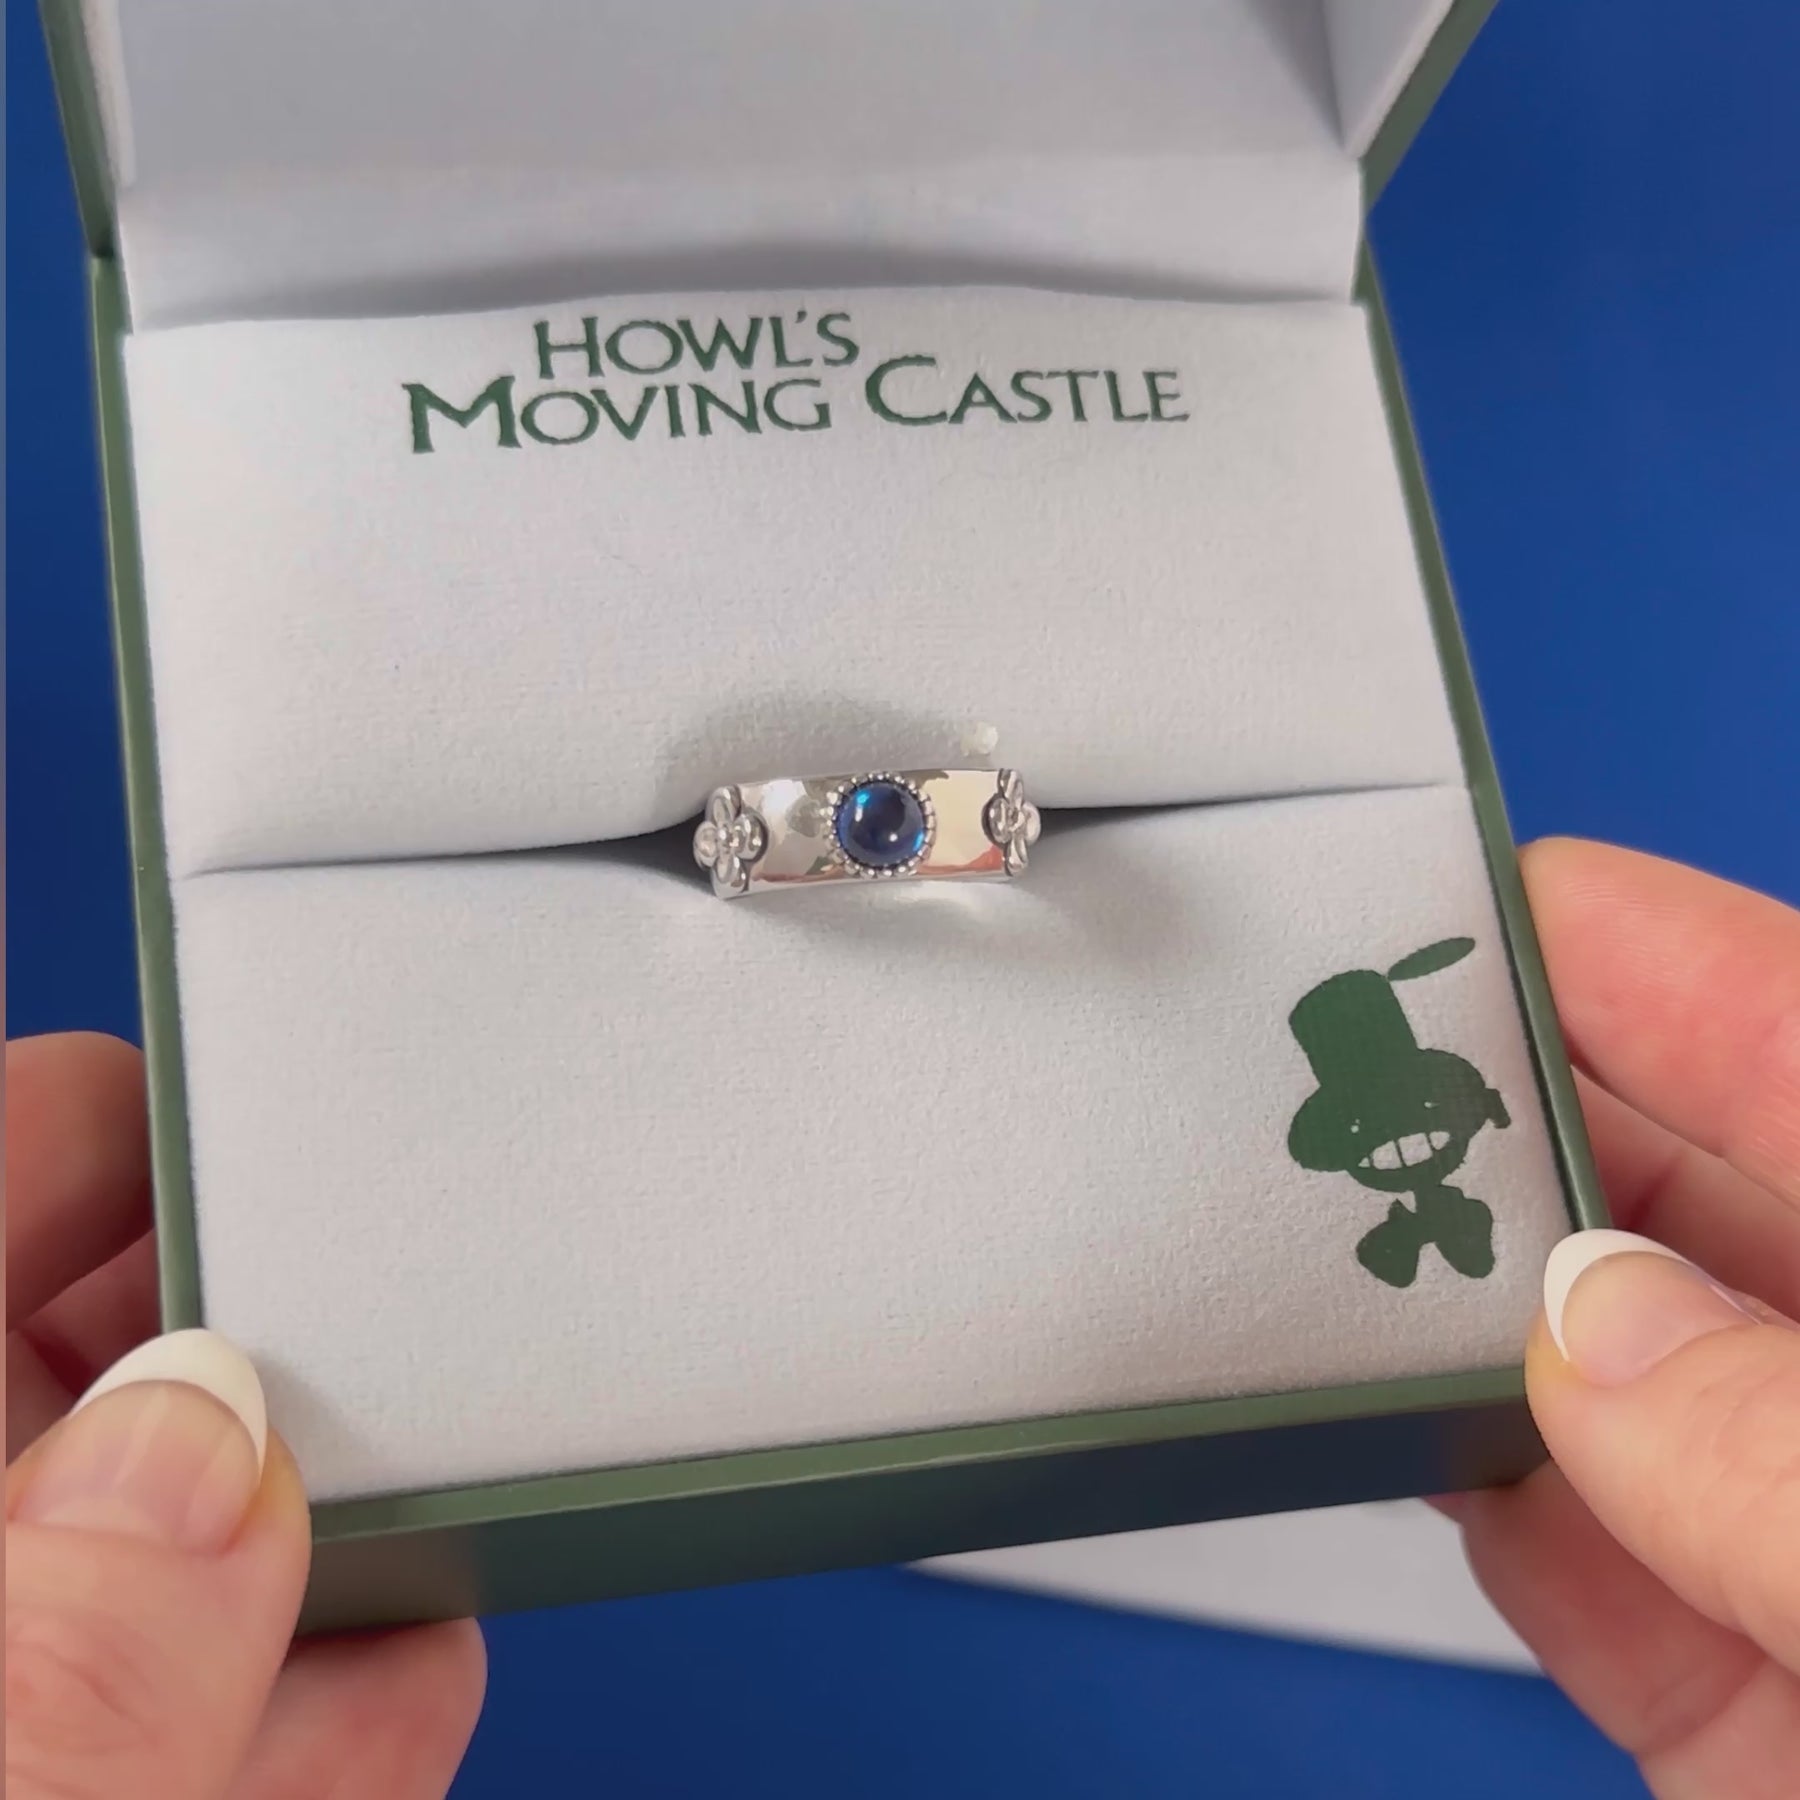 MATCHING HOWL'S MOVING CASTLE WEDDING RING SET IN STERLING SILVER